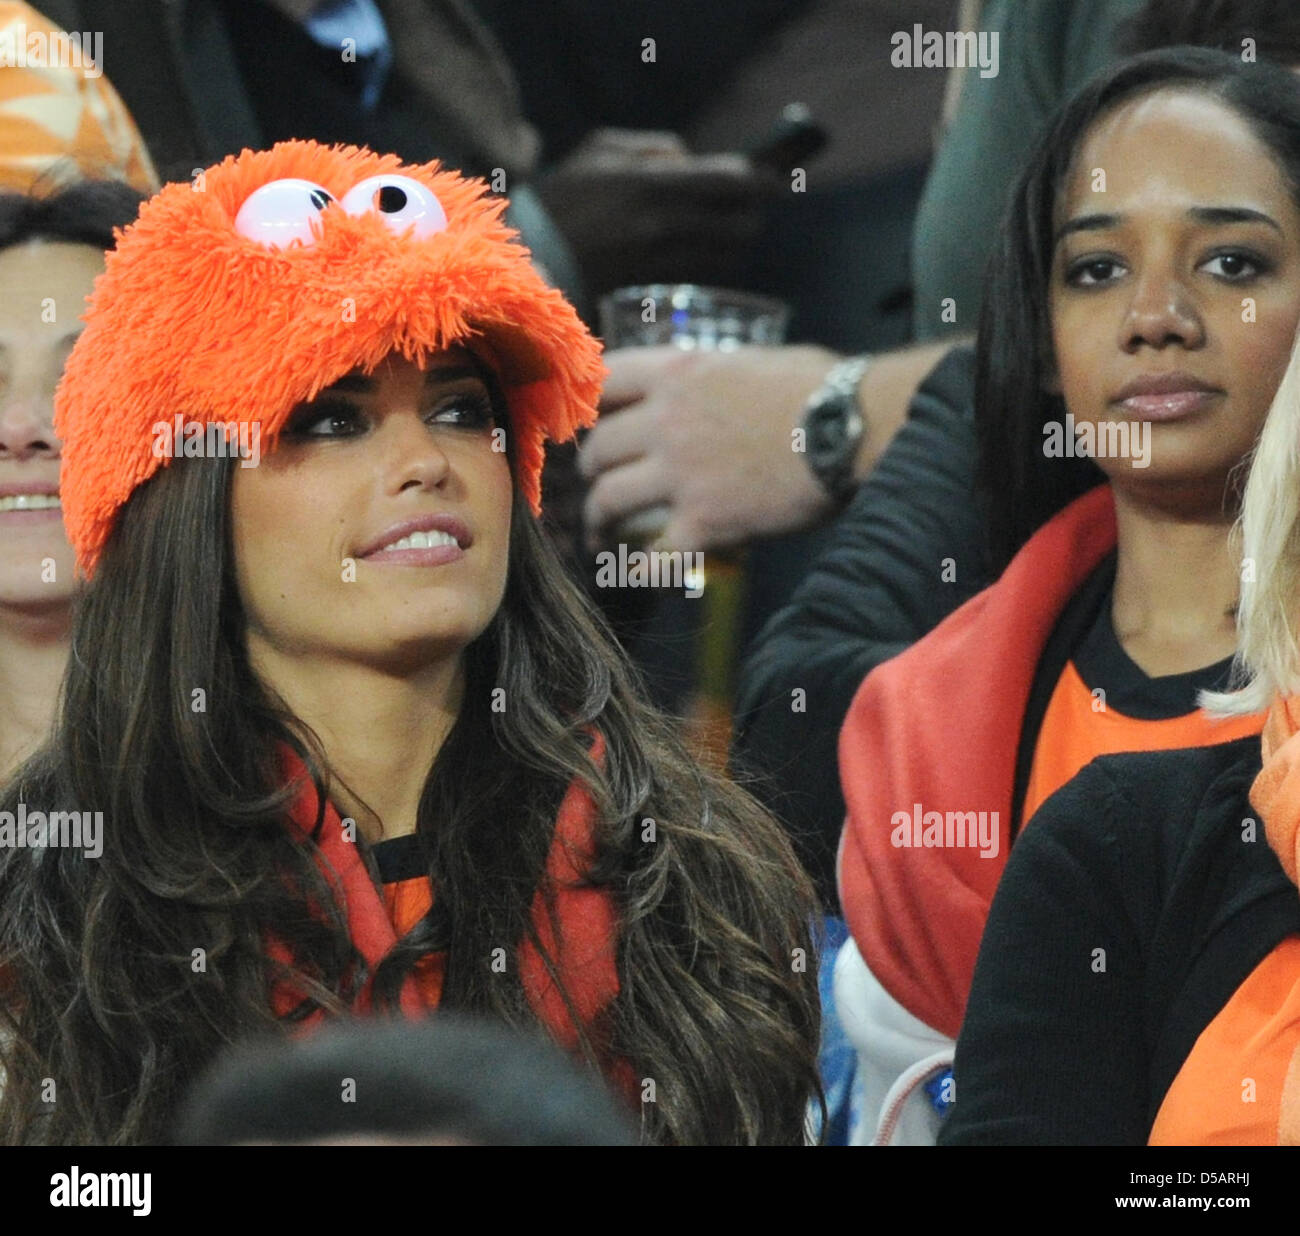 Yolanthe Cabau van Kasbergen (L), girlfriend of Dutch player Wesley Sneijder on the stand prior to the 2010 FIFA World Cup final match between the Netherlands and Spain at Soccer City Stadium in Johannesburg, South Africa 11 July 2010. Photo: Marcus Brandt dpa - Please refer to http://dpaq.de/FIFA-WM2010-TC Stock Photo